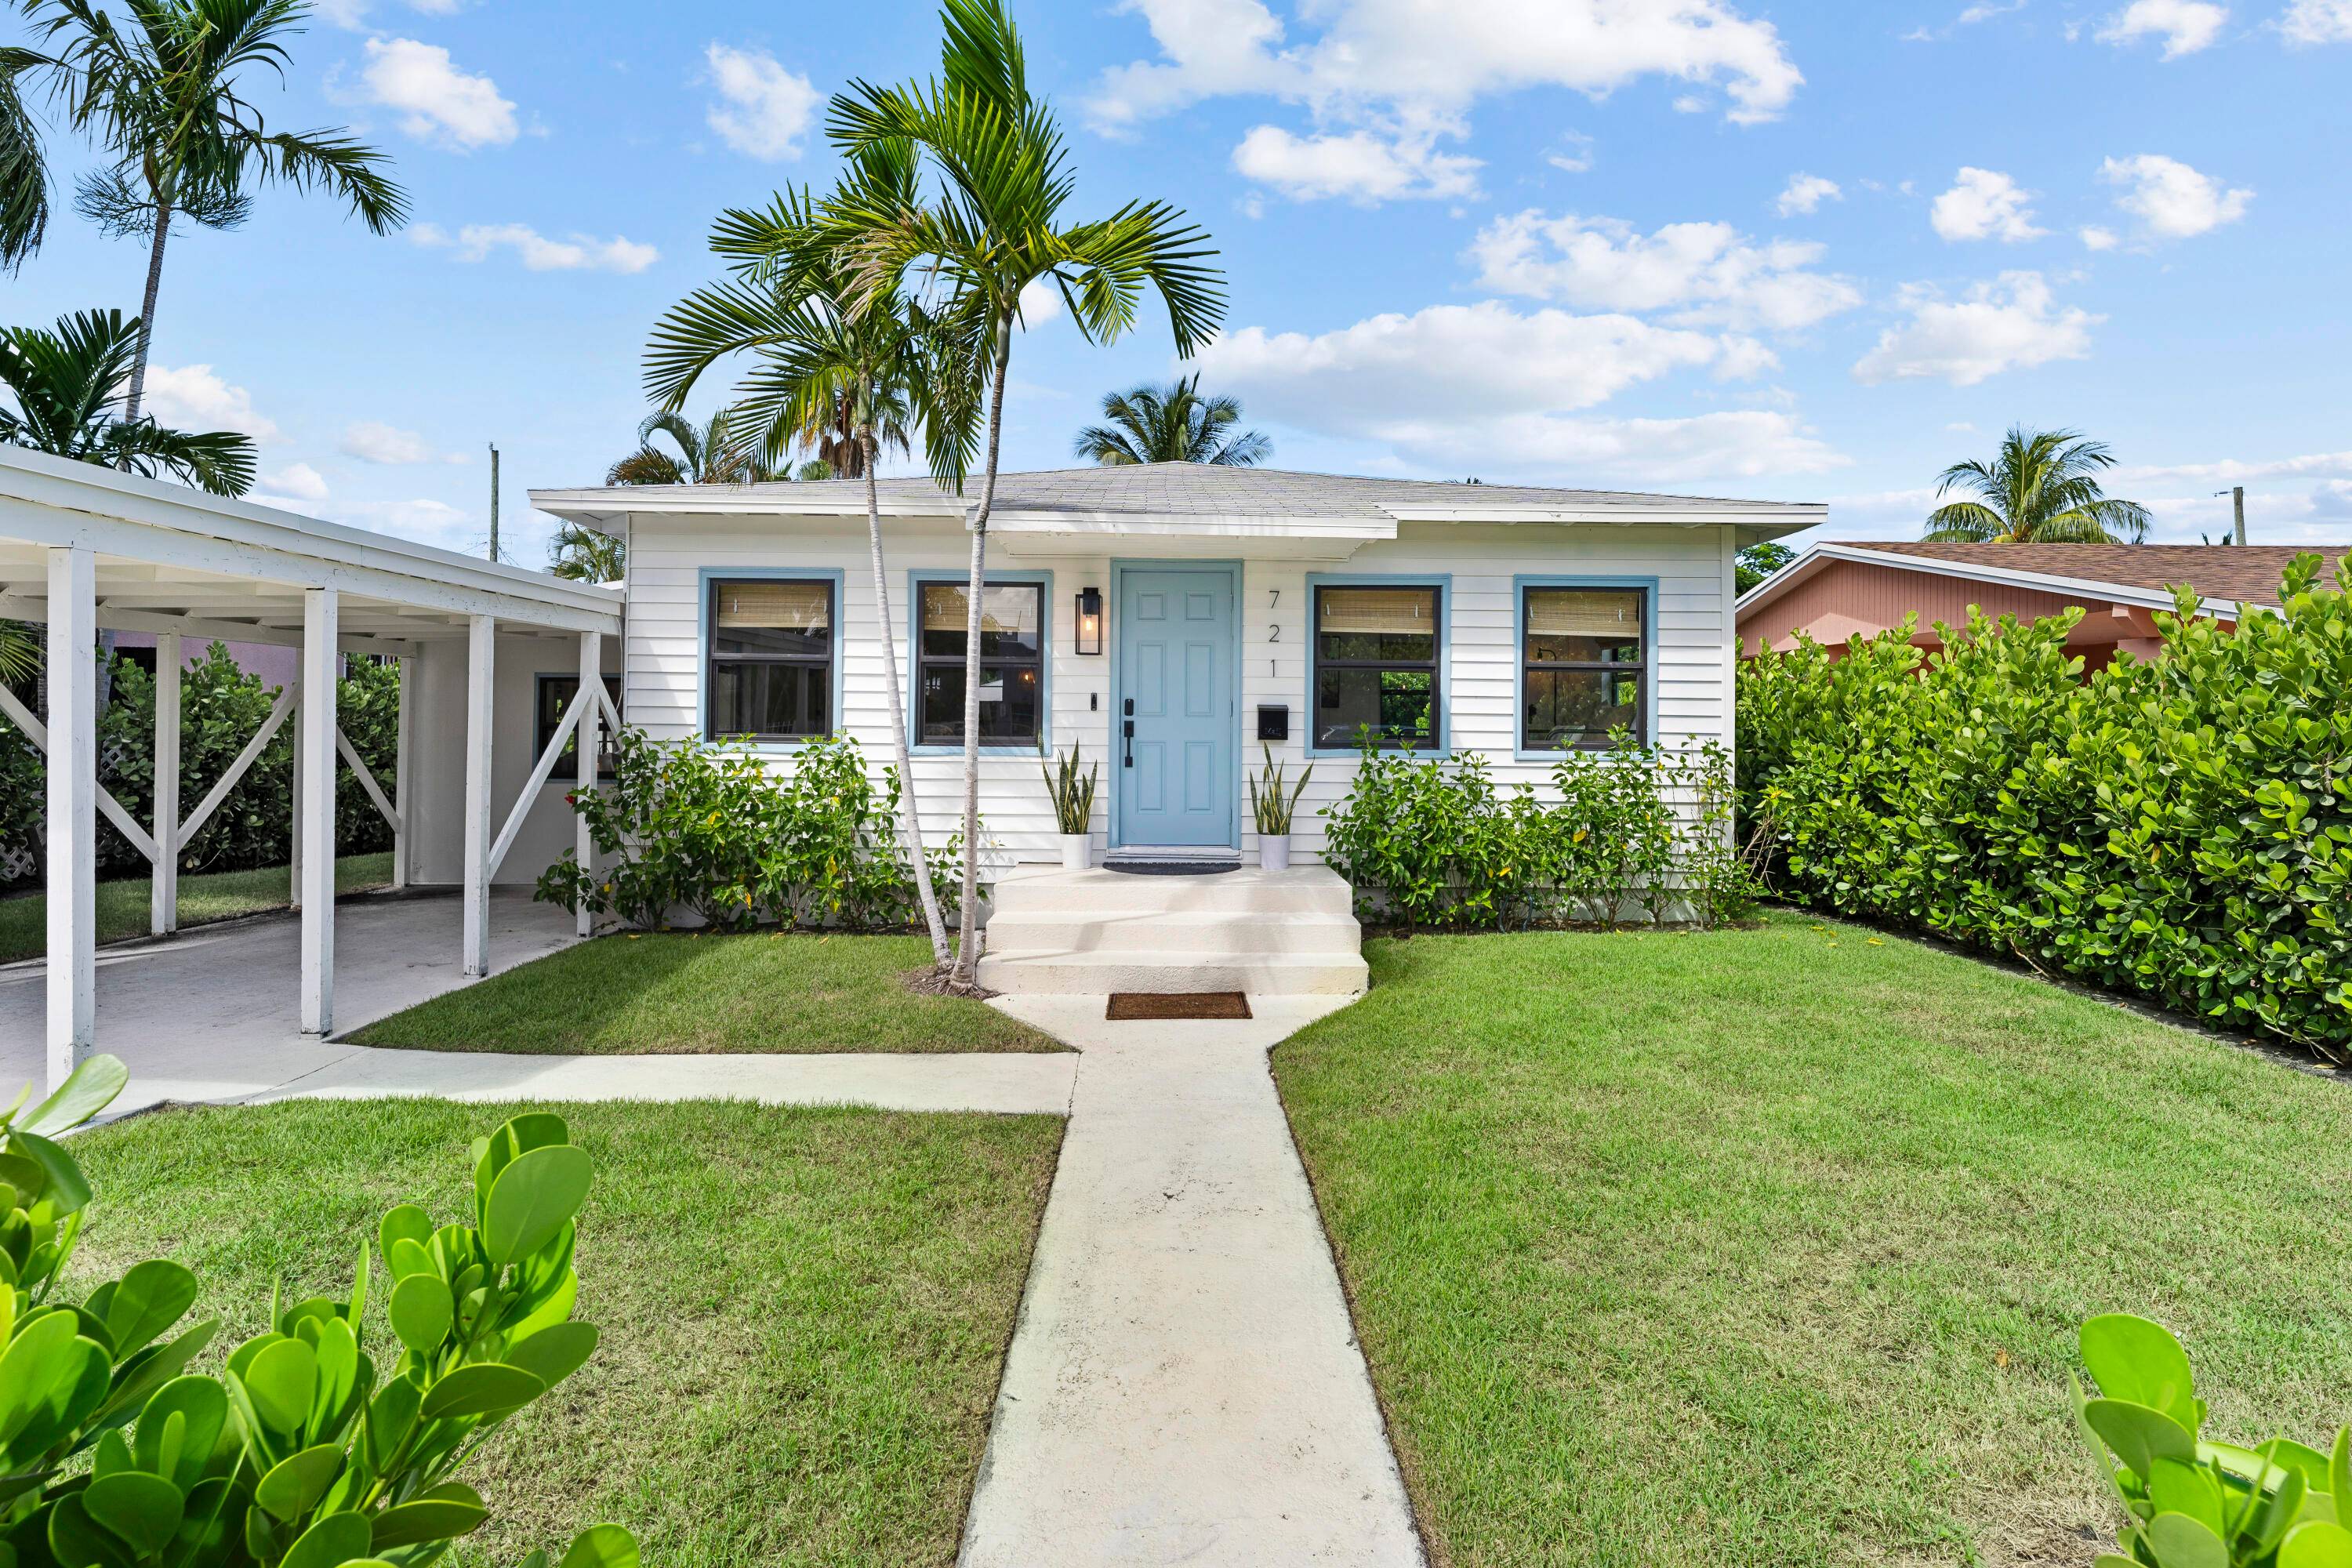 Escape to the epitome of seasonal living at 721 Dobbins St, West Palm Beach, FL 33405.